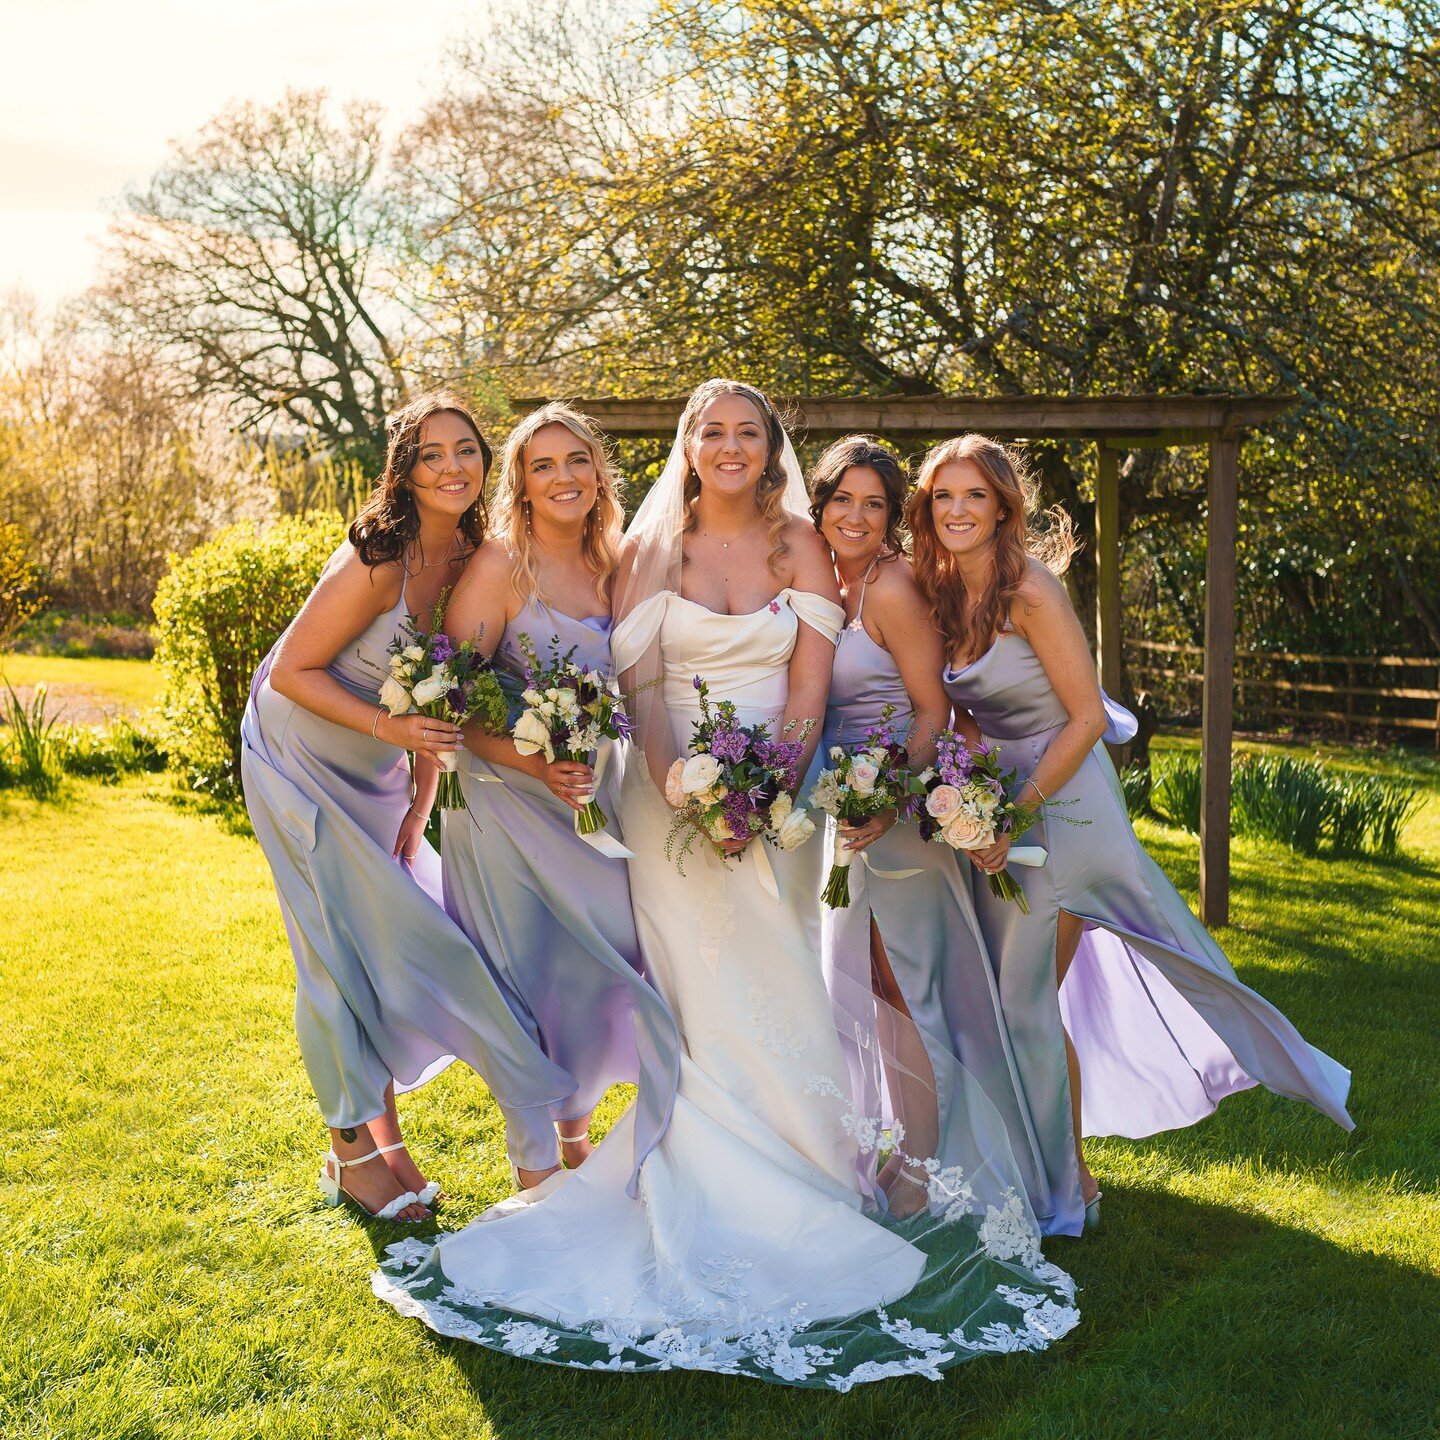 ❤️ Beautiful Abbi @abbsssg and her lovely bridesmaids

📸 Thank you Carlos @cazevedophotography for such gorgeous images

#weddingflowers #weddingflorist #bridalbouquet #bridesmaids #girlgang #besties #wedding #florist #springwedding #spring #country